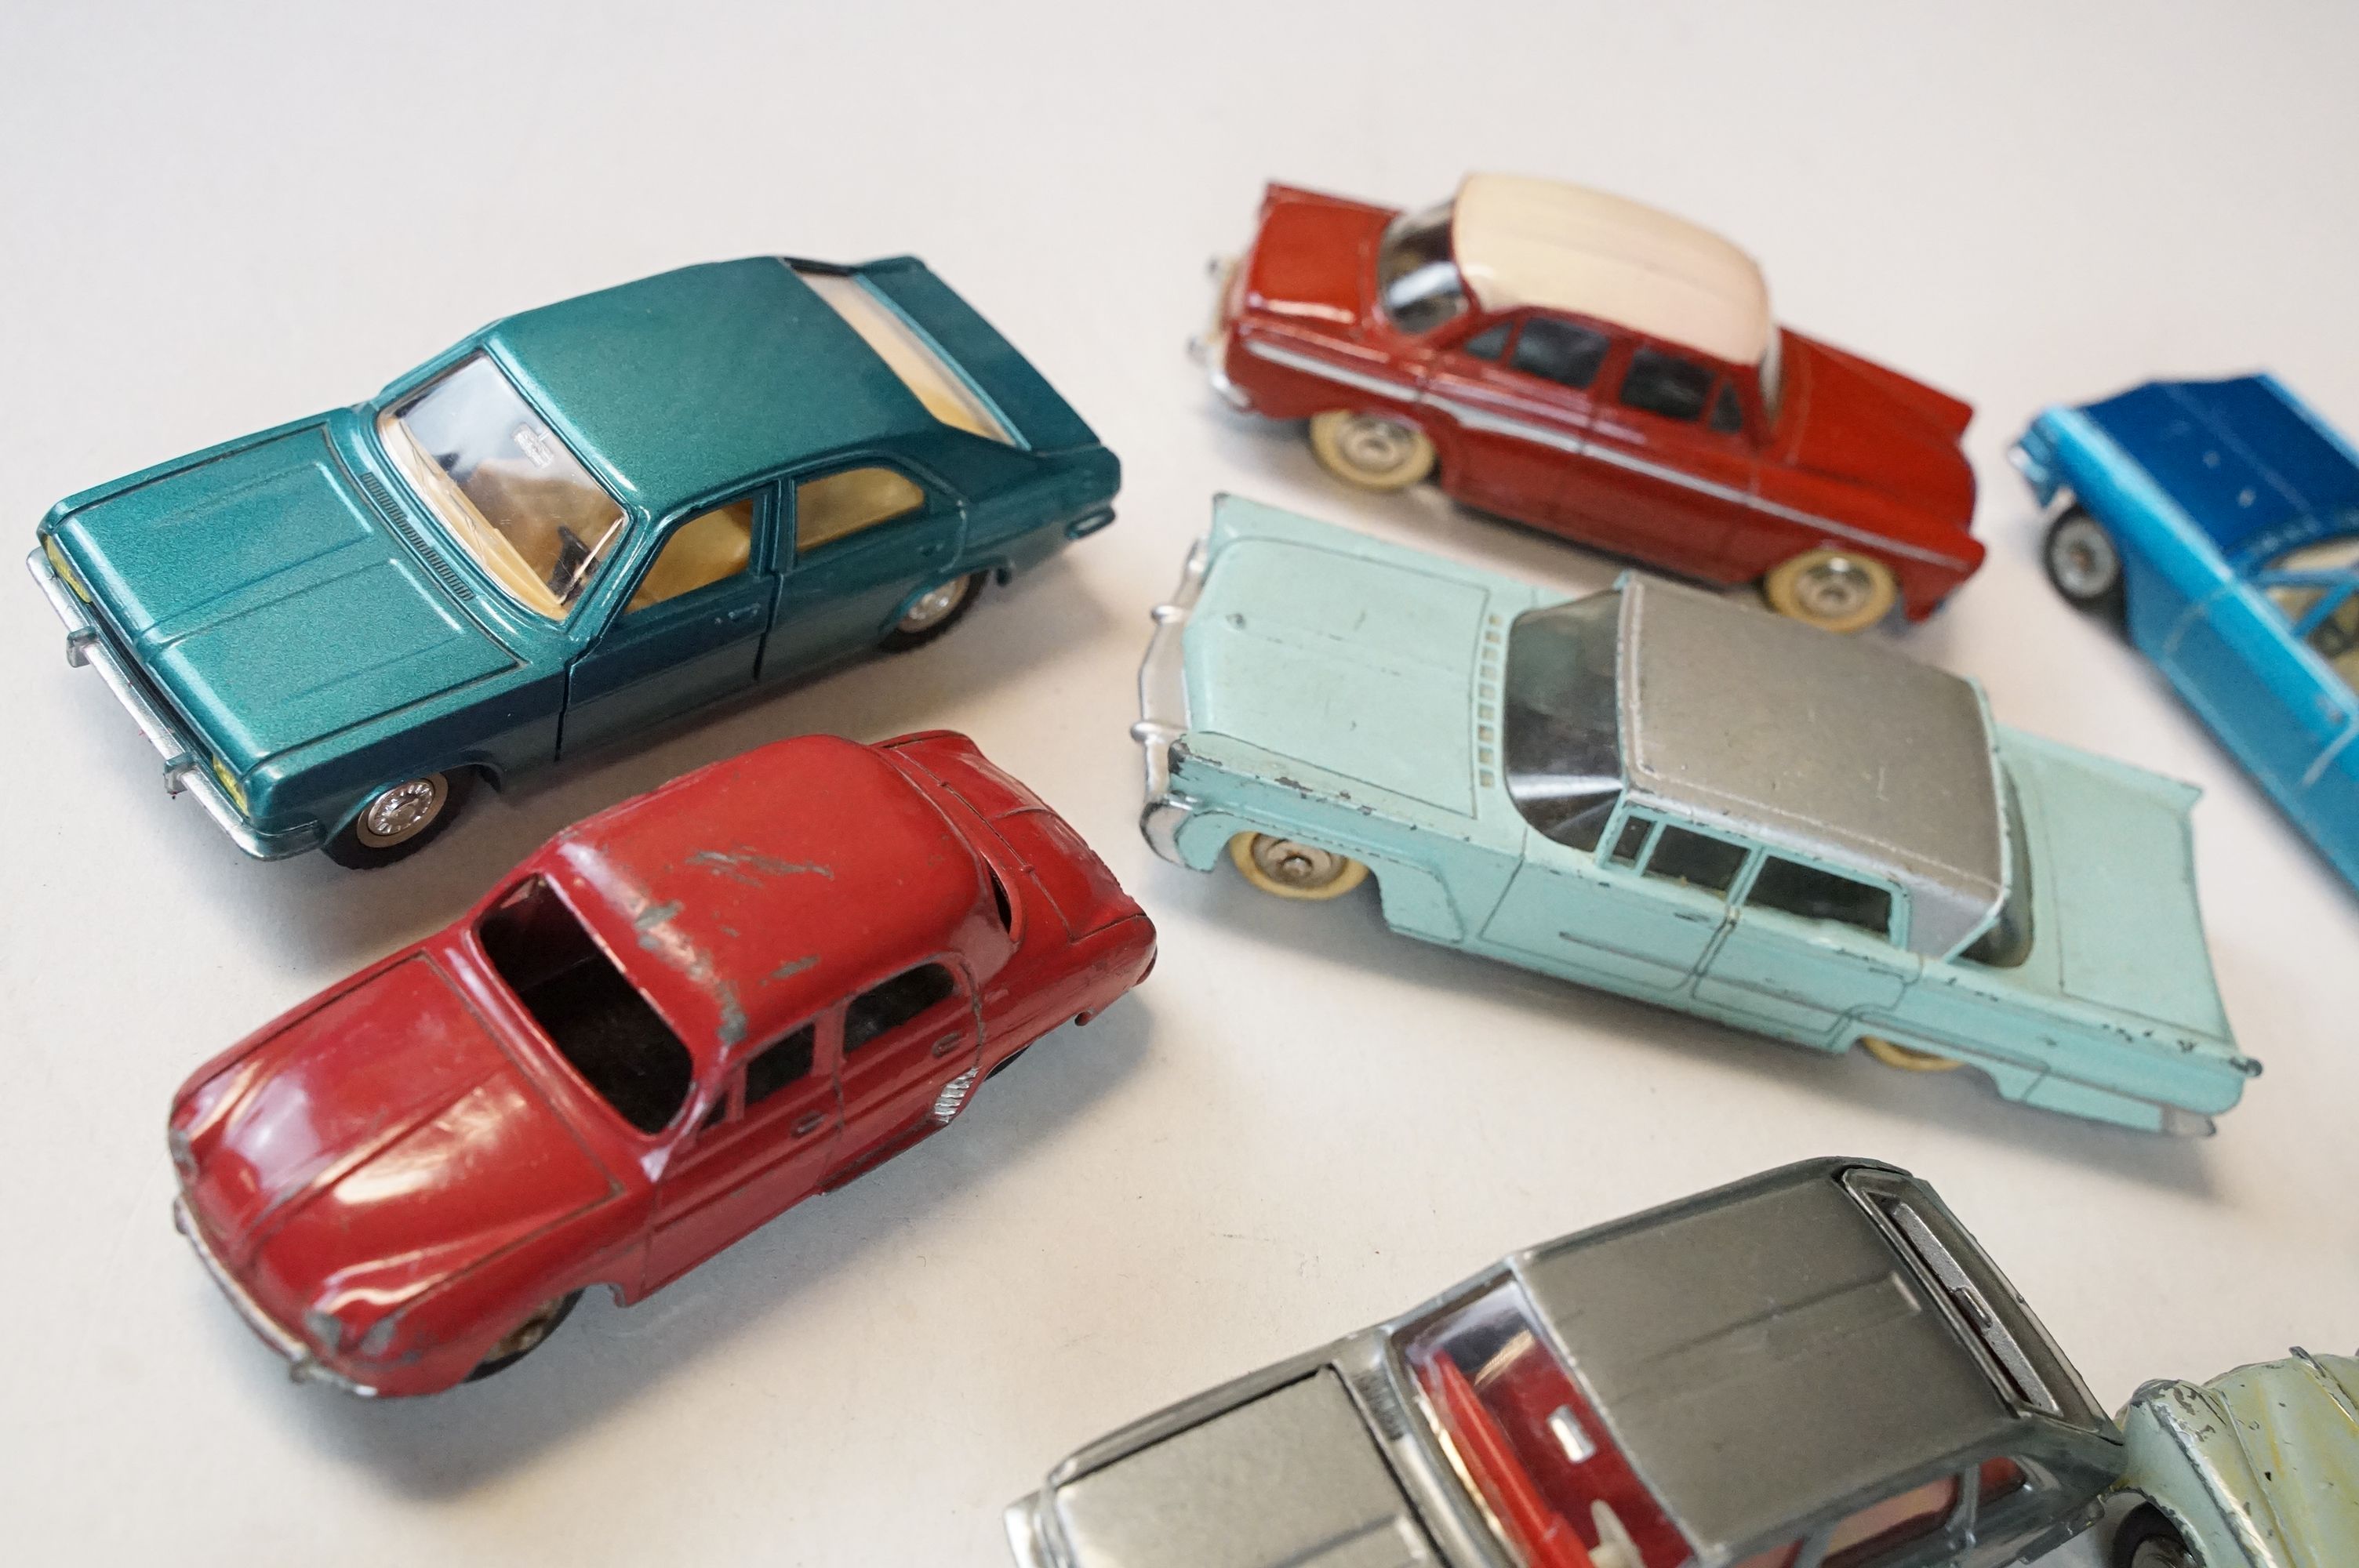 22 French Mid 20th C play worn Dinky diecast models to include Panhard PL17, 24J Coupe Alfa Romeo, - Image 6 of 9